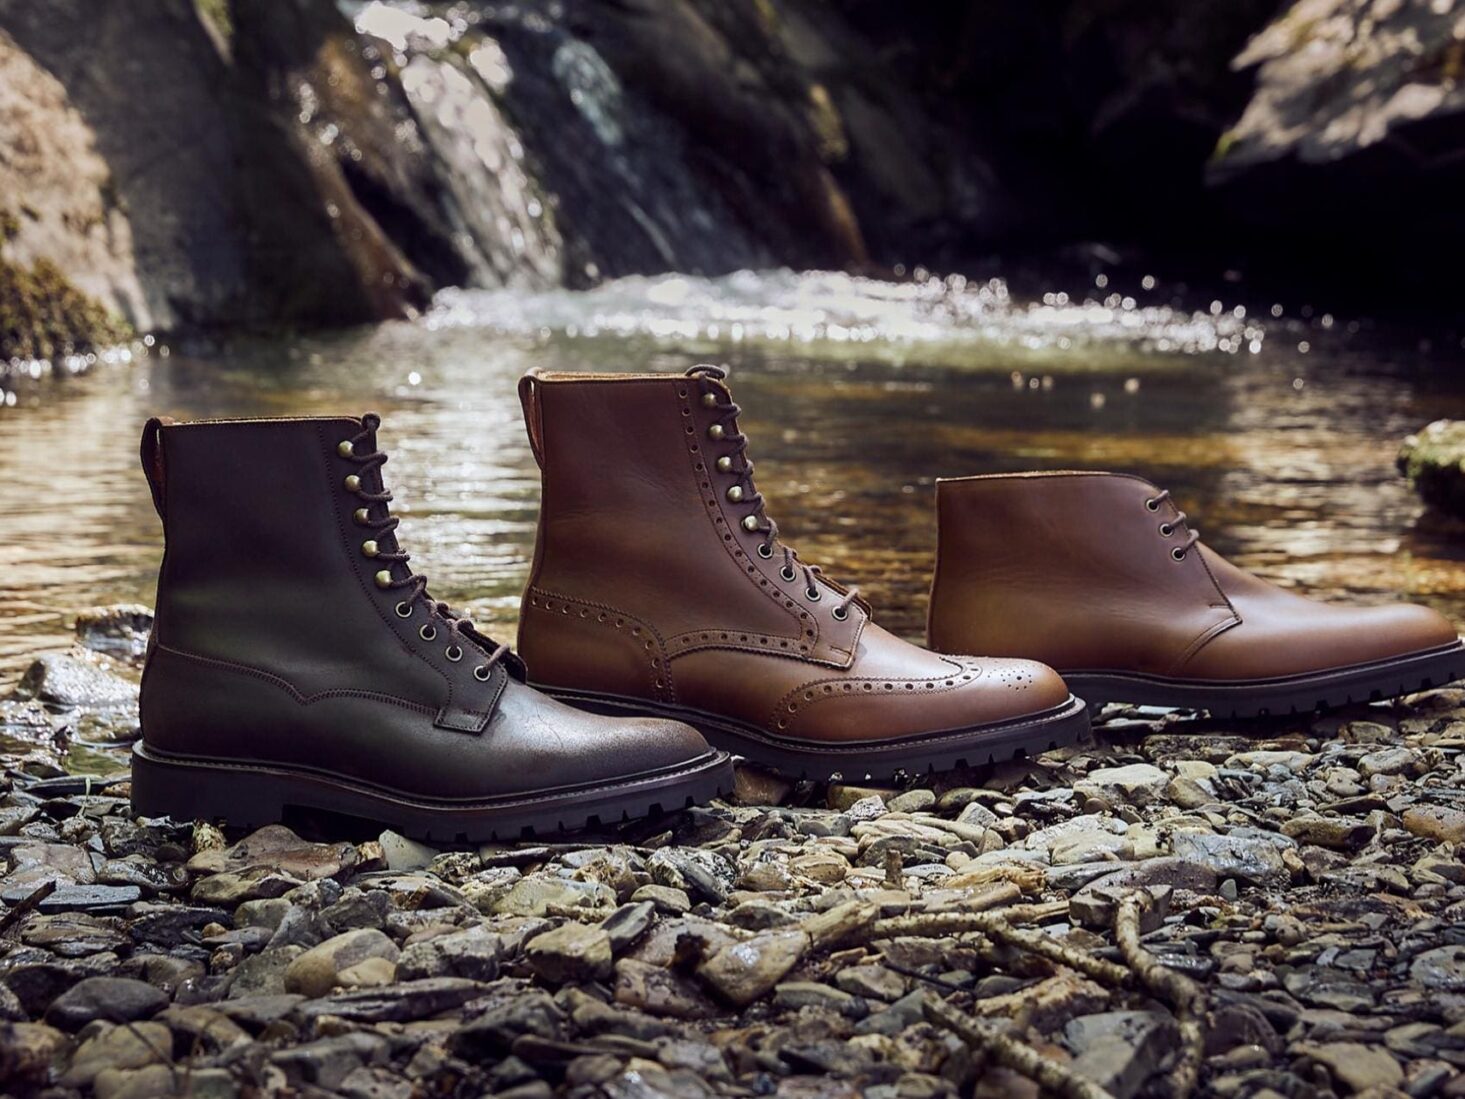 Crockett & Jones has just unveiled the only boots you’ll need this ...